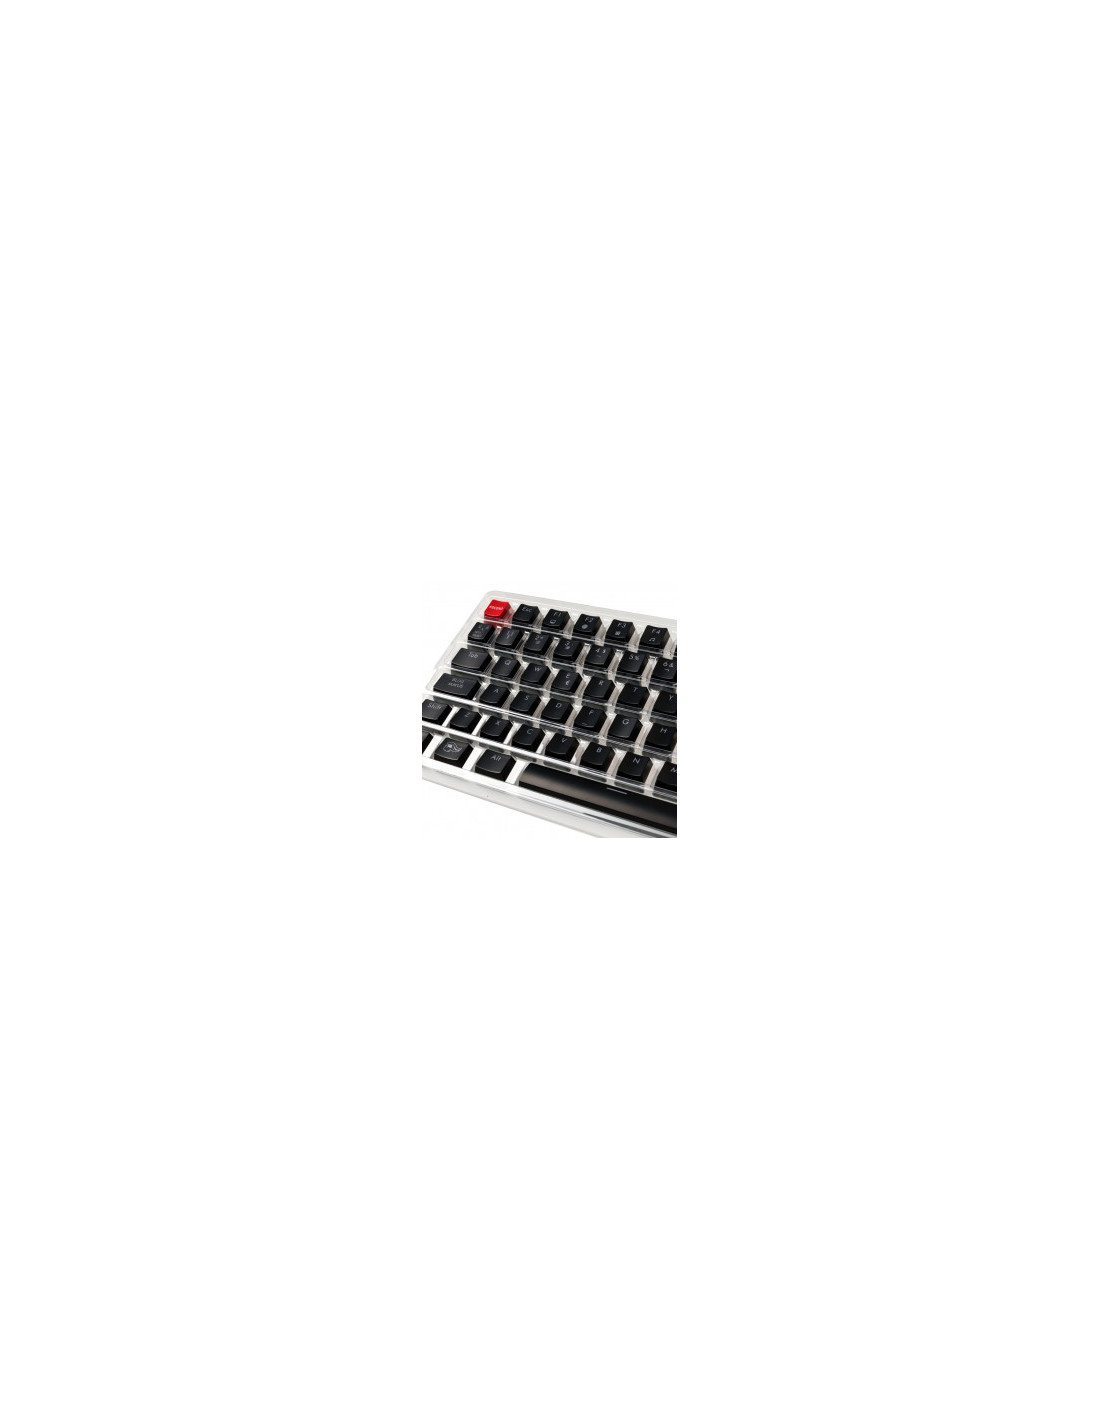 Glorious PC Gaming Race ABS Keycaps 105 ES Layout